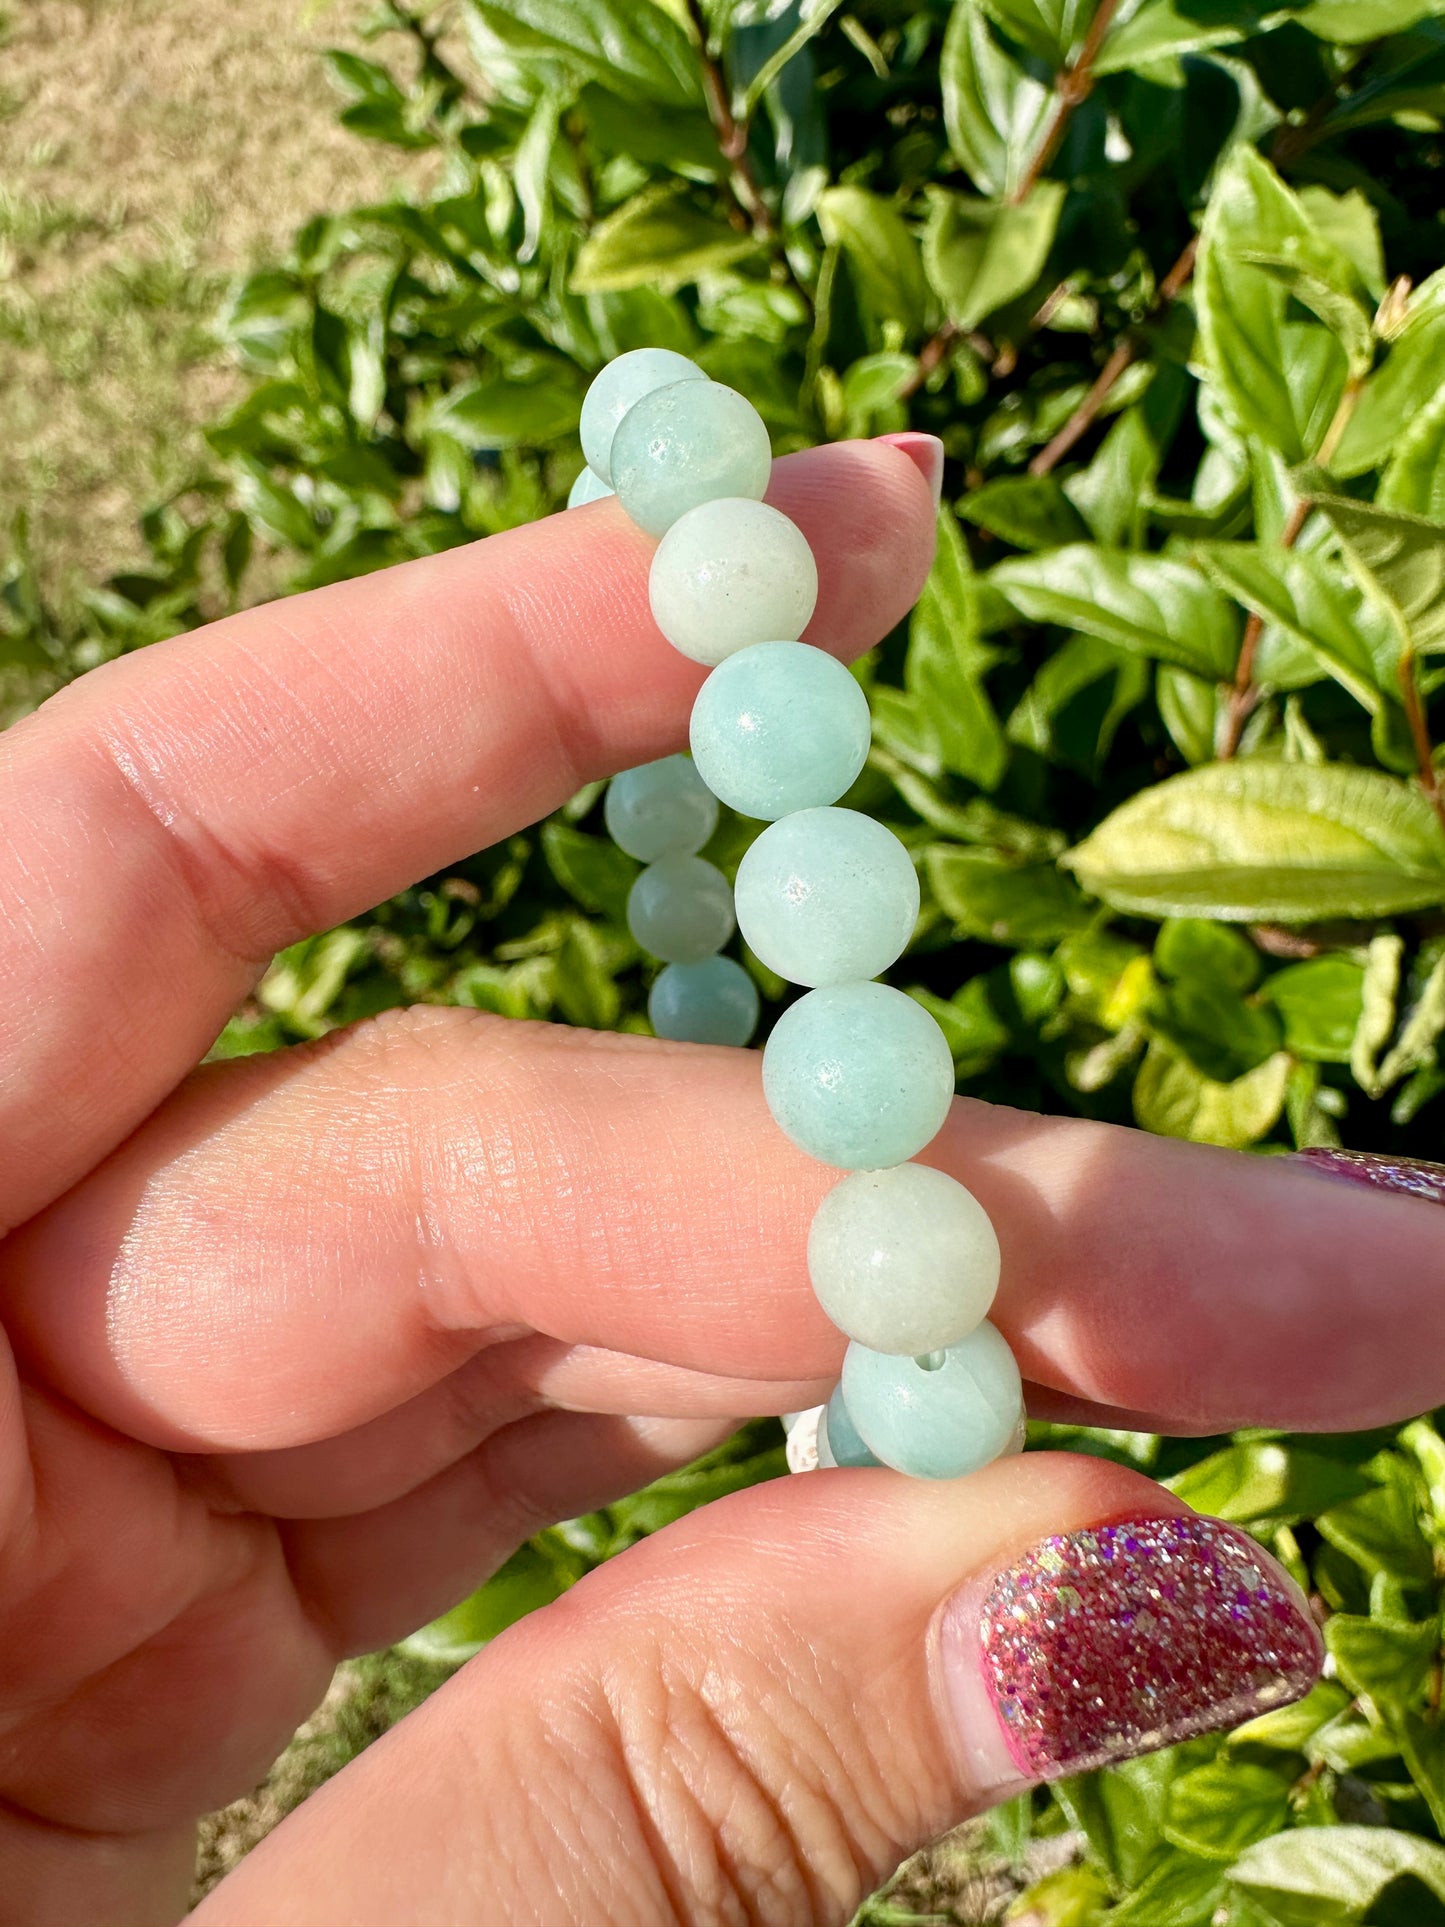 Chic Amazonite Bracelet with 8mm Beads - Embrace Calmness & Harmony, Perfect Accessory for Daily Wear or Meditation